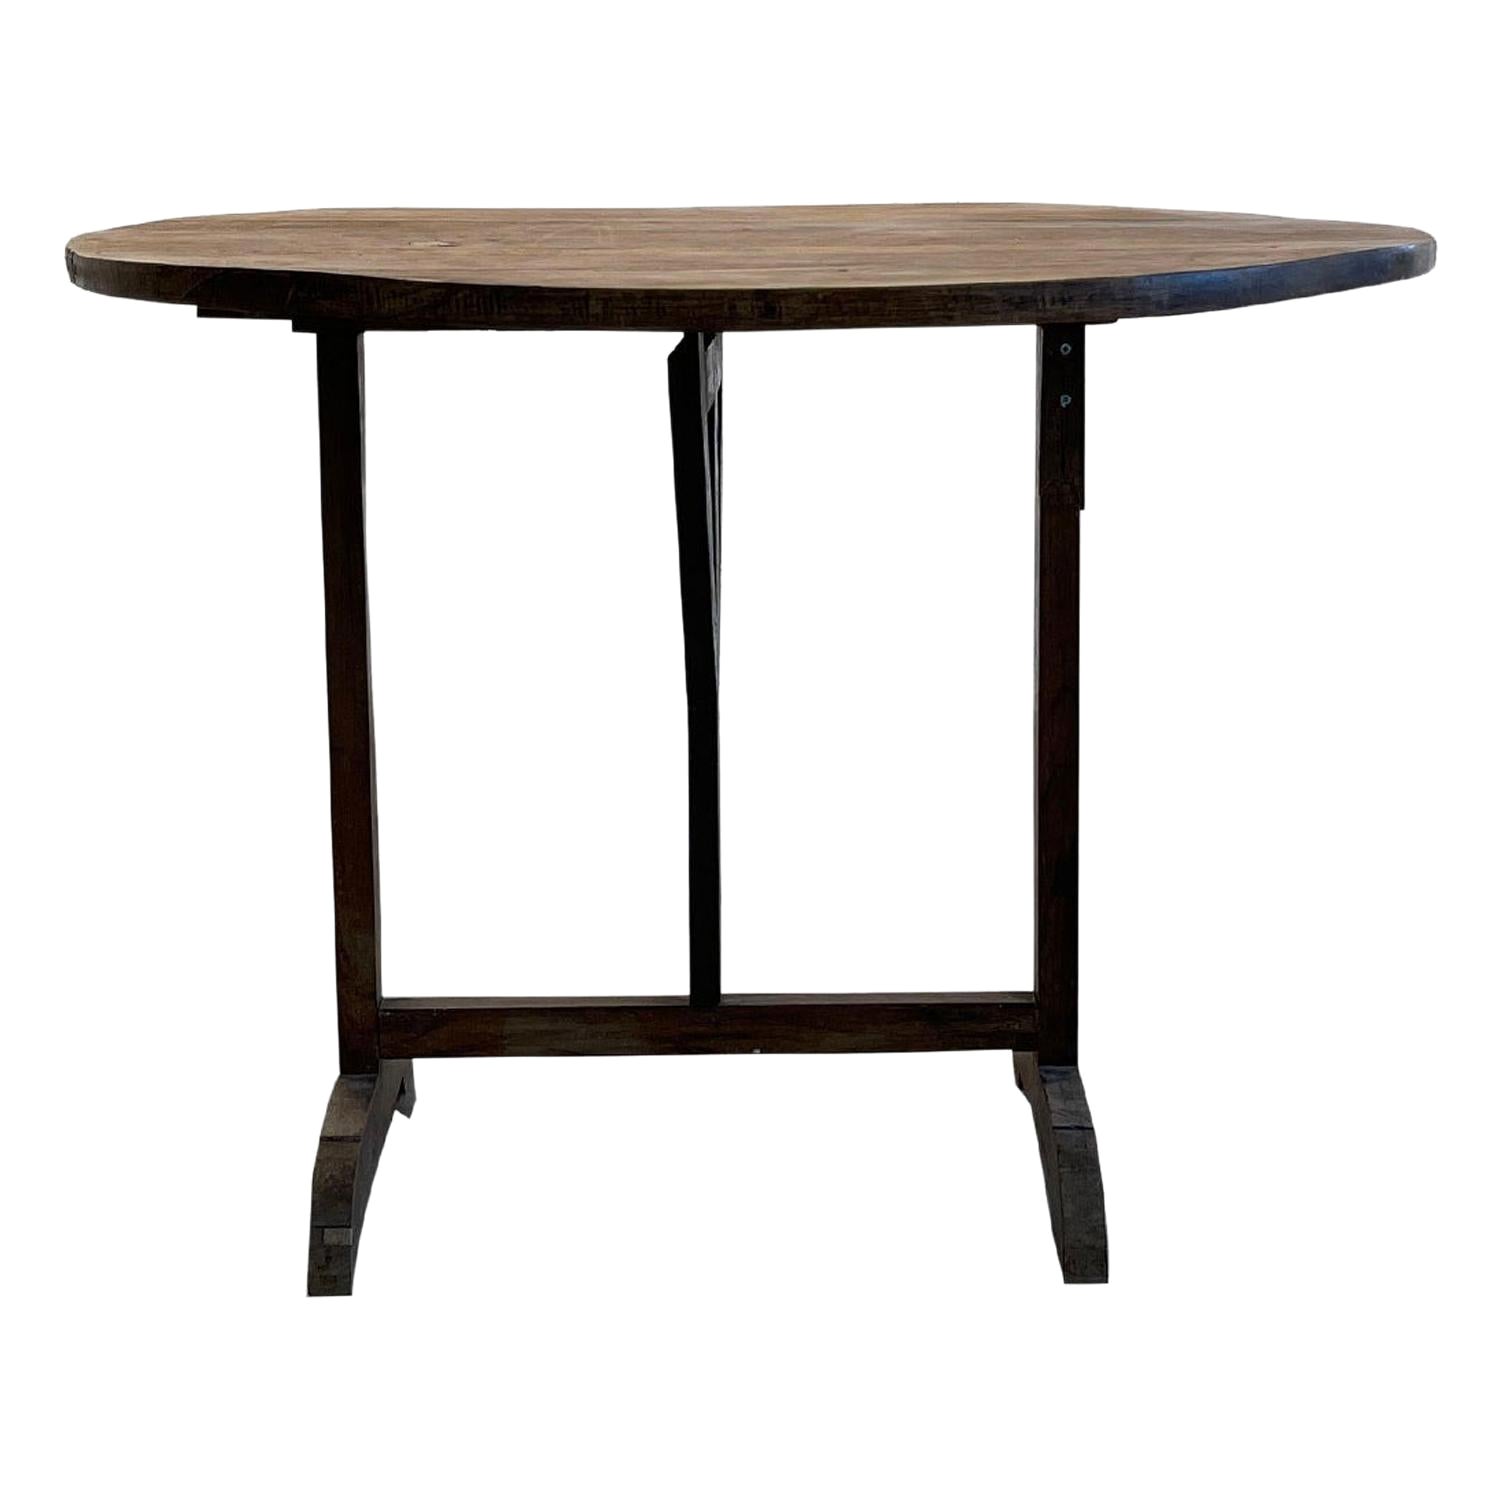 19th Century French Walnut Occasional Wine Folding Table, Antique Vigneron Table For Sale